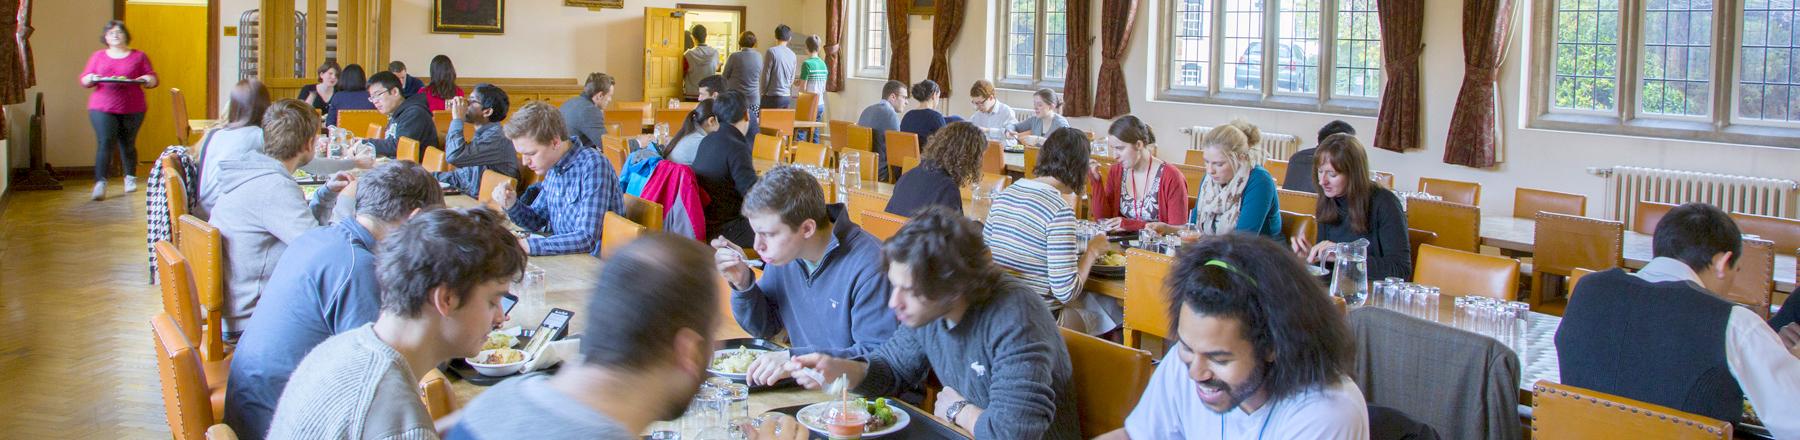 The main dining hall is a focal point for the College